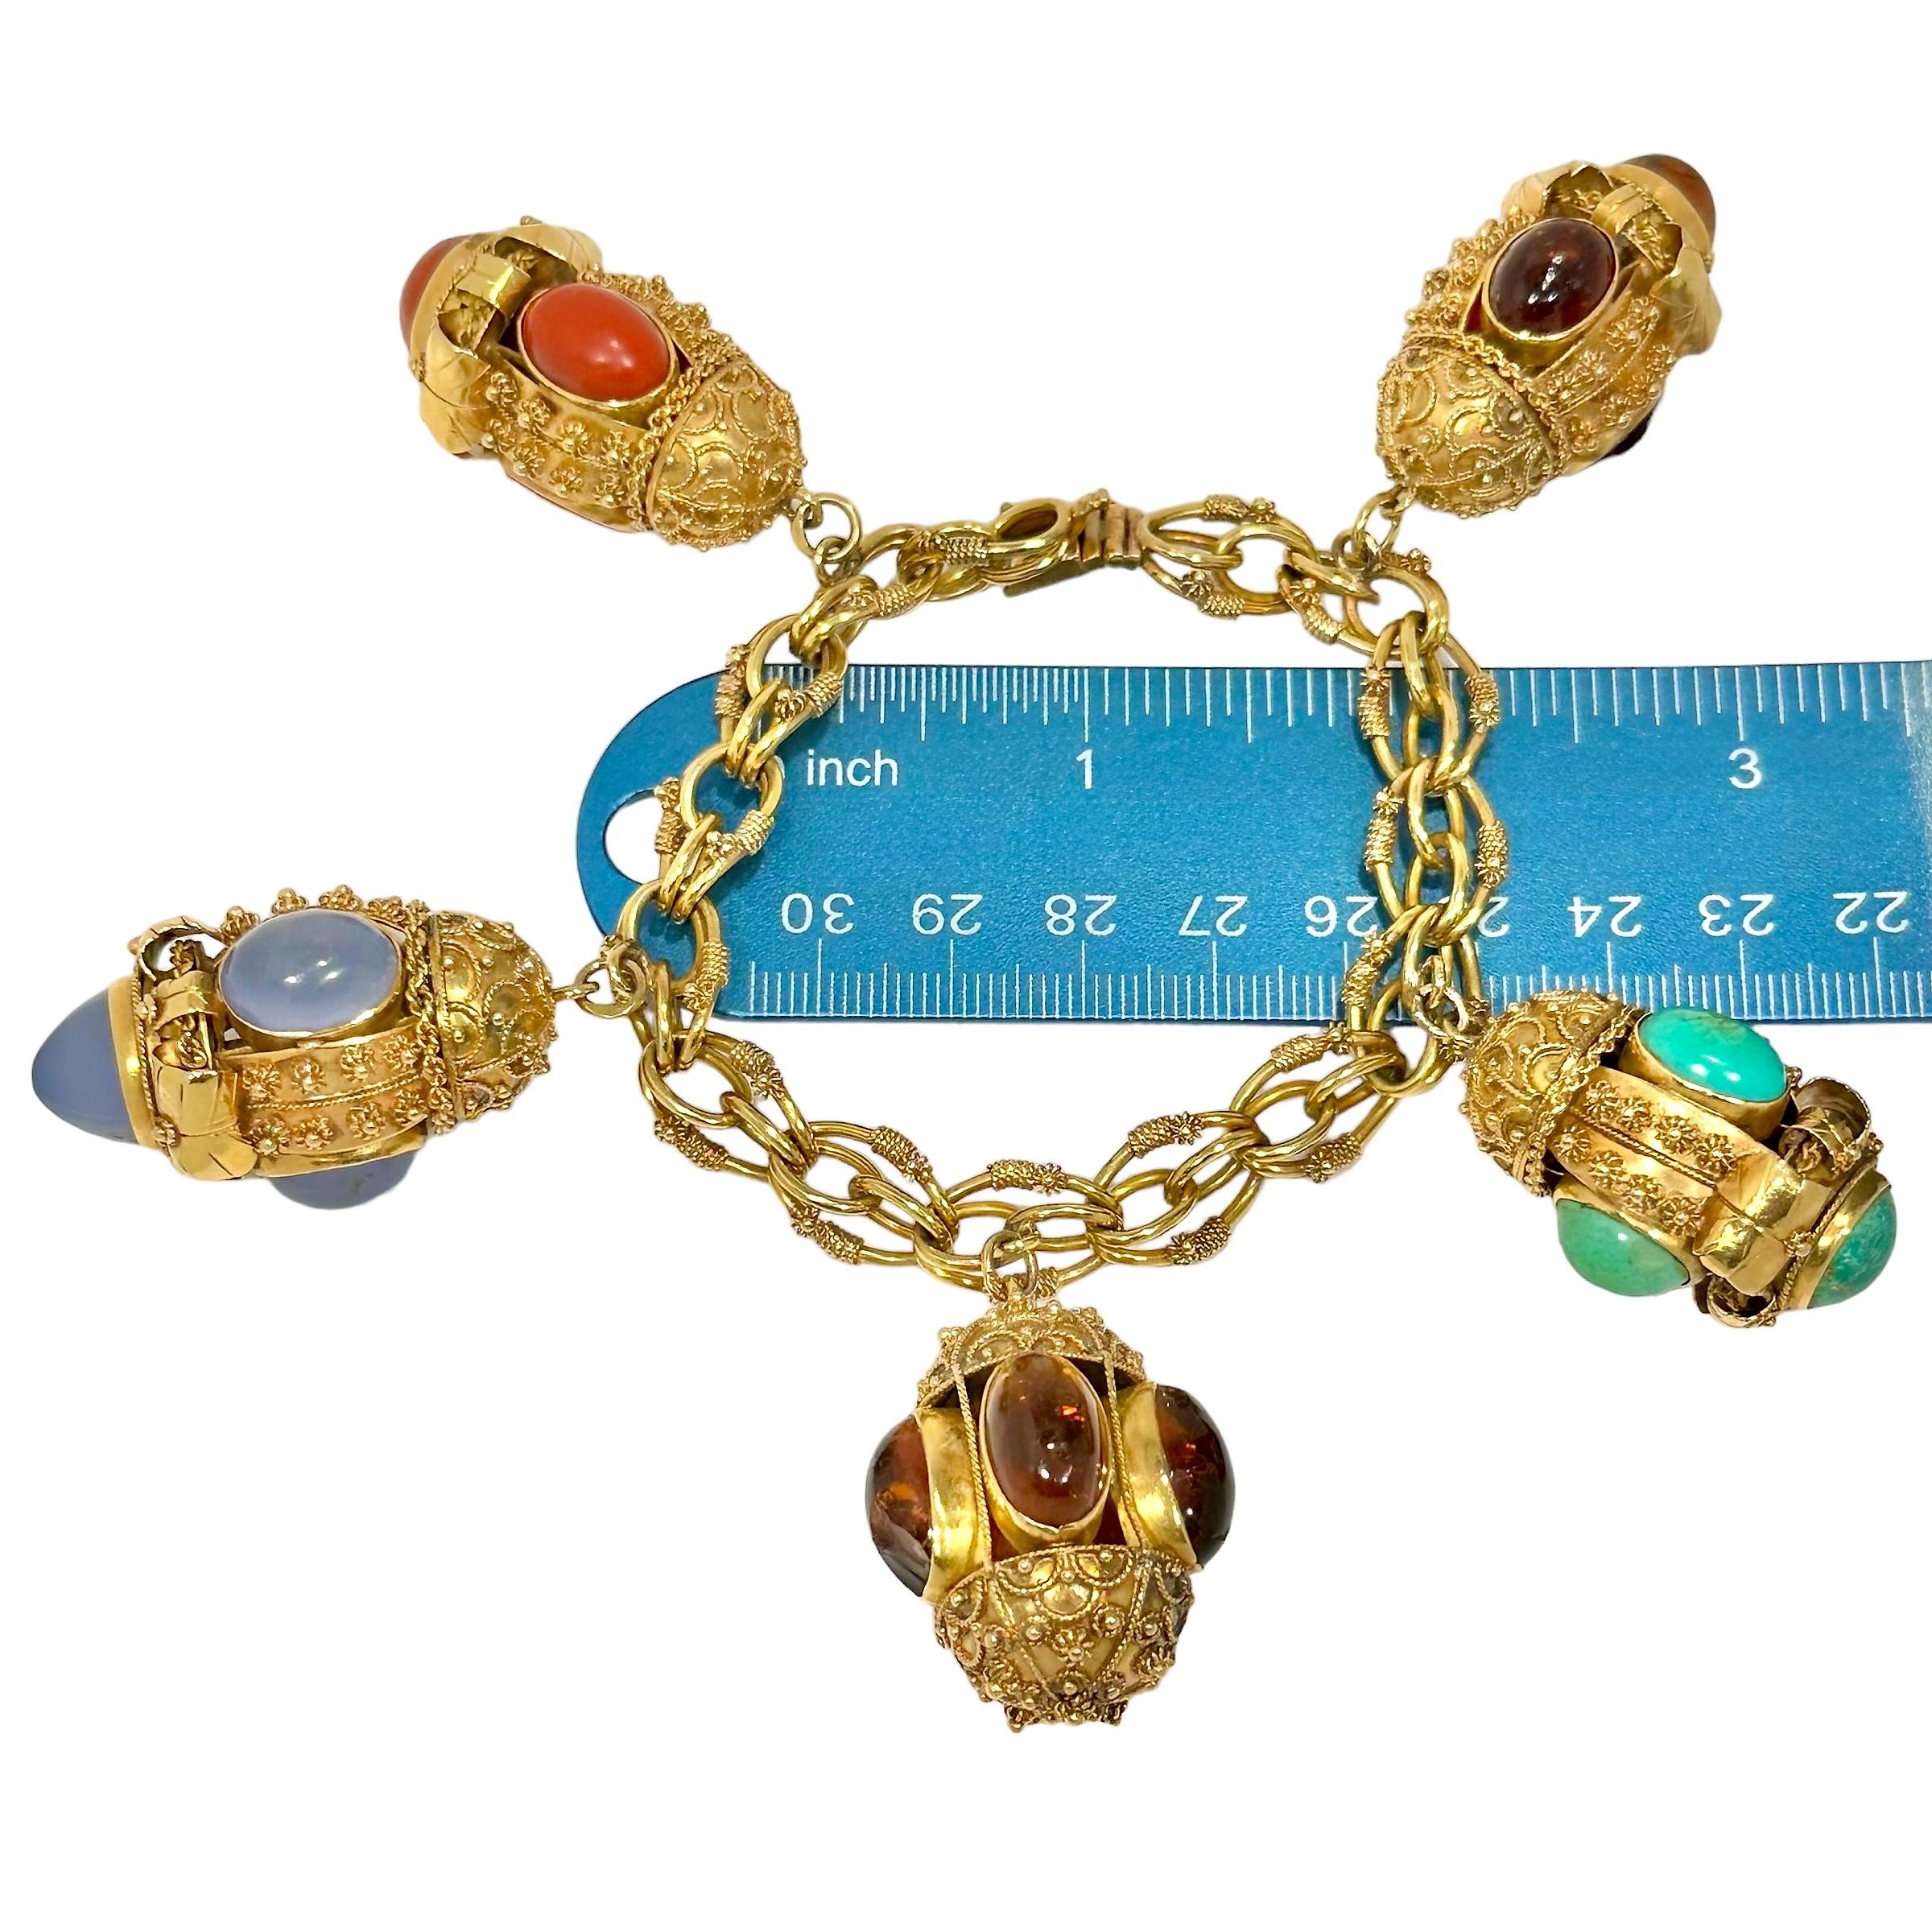 Cabochon Mid-20th Century Italian 18k Gold Etruscan Revival Charm Bracelet with 5 Charms For Sale